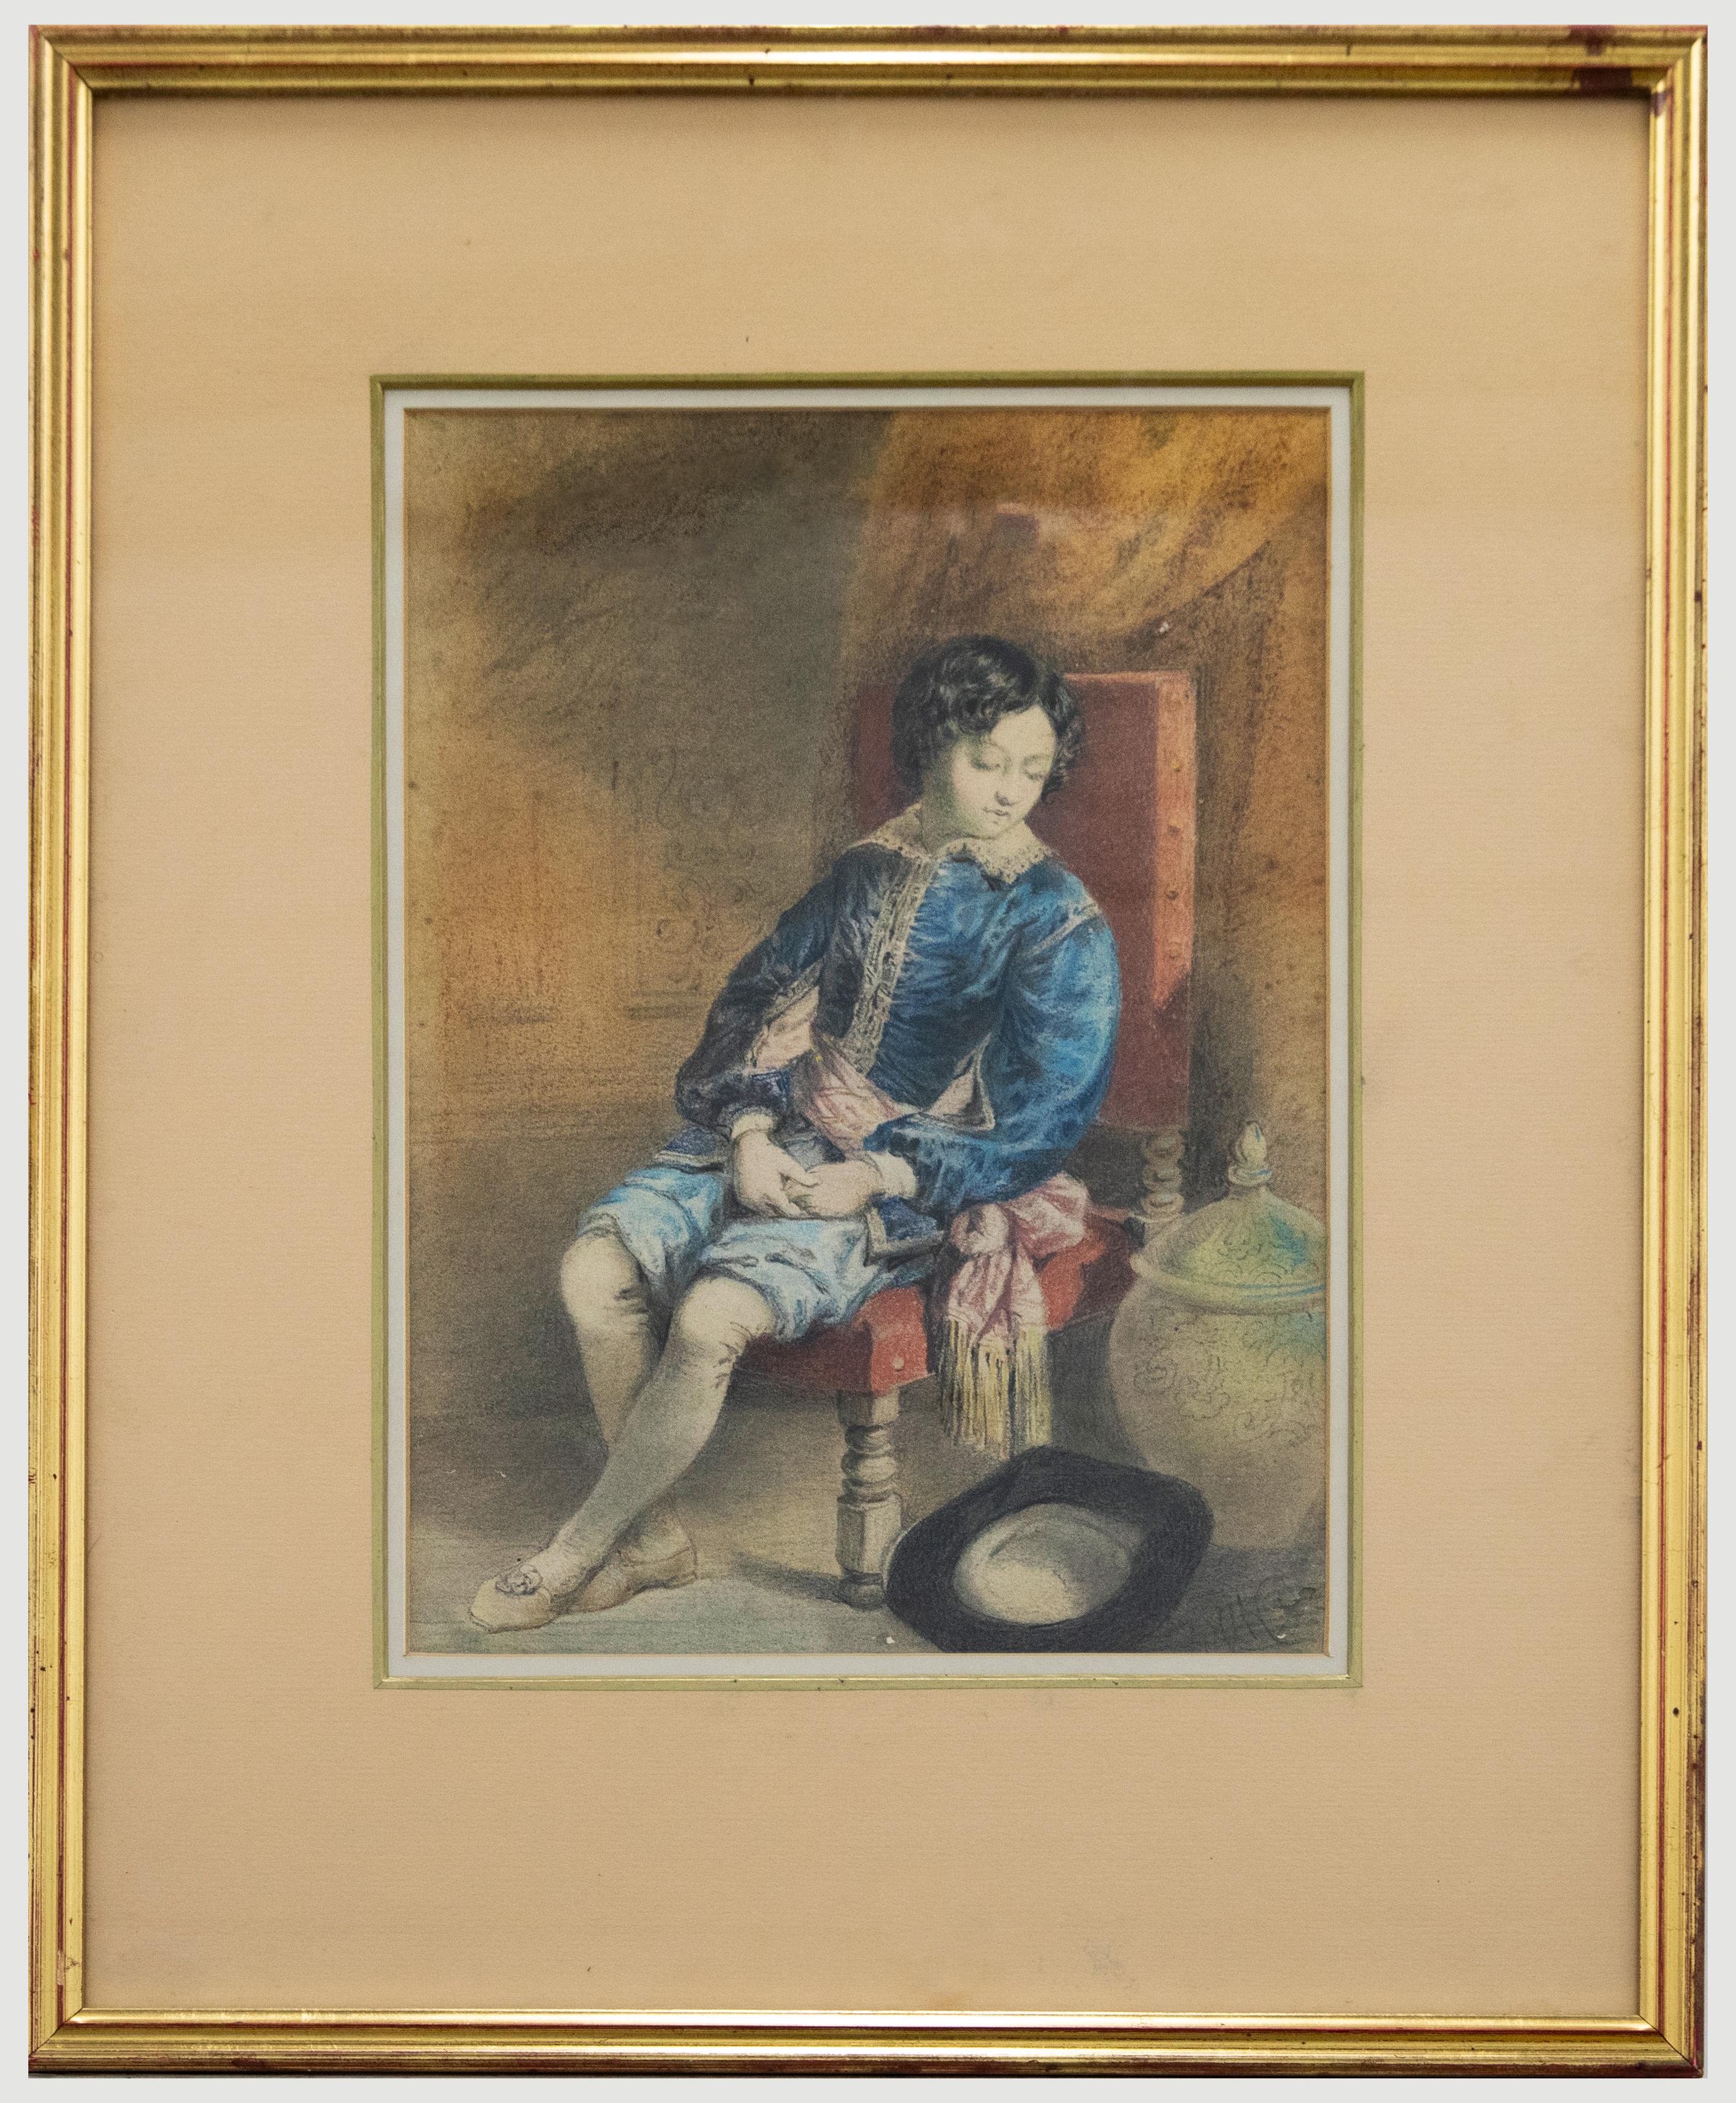 A charming pastel study of a 17th Century noble child seated on a red chair next we an earn. He looks down at a hat on the floor and wears a royal blue uniform. Signed faintly with initials to the lower right. Presented in a gilt frame and yellow